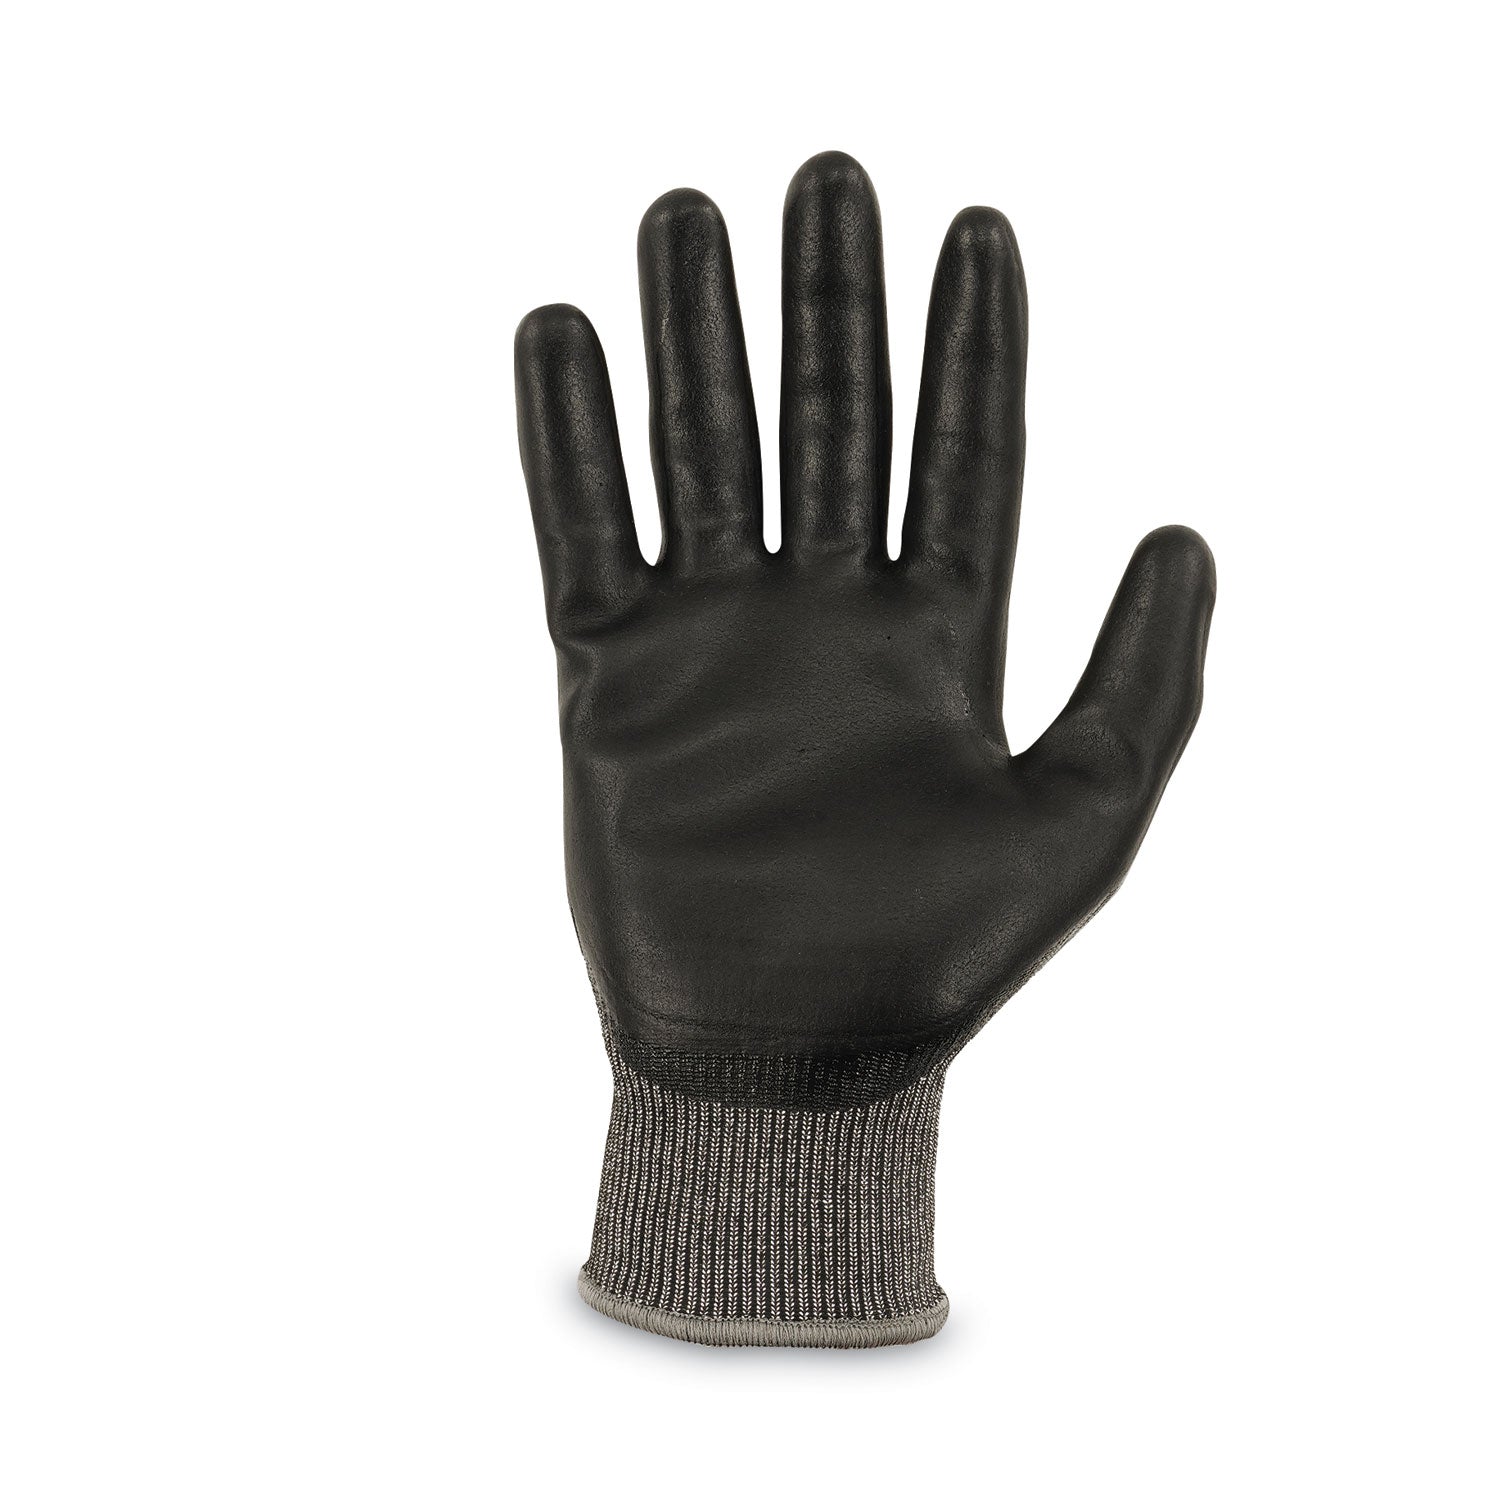 proflex-7072-ansi-a7-nitrile-coated-cr-gloves-gray-medium-pair-ships-in-1-3-business-days_ego10313 - 8